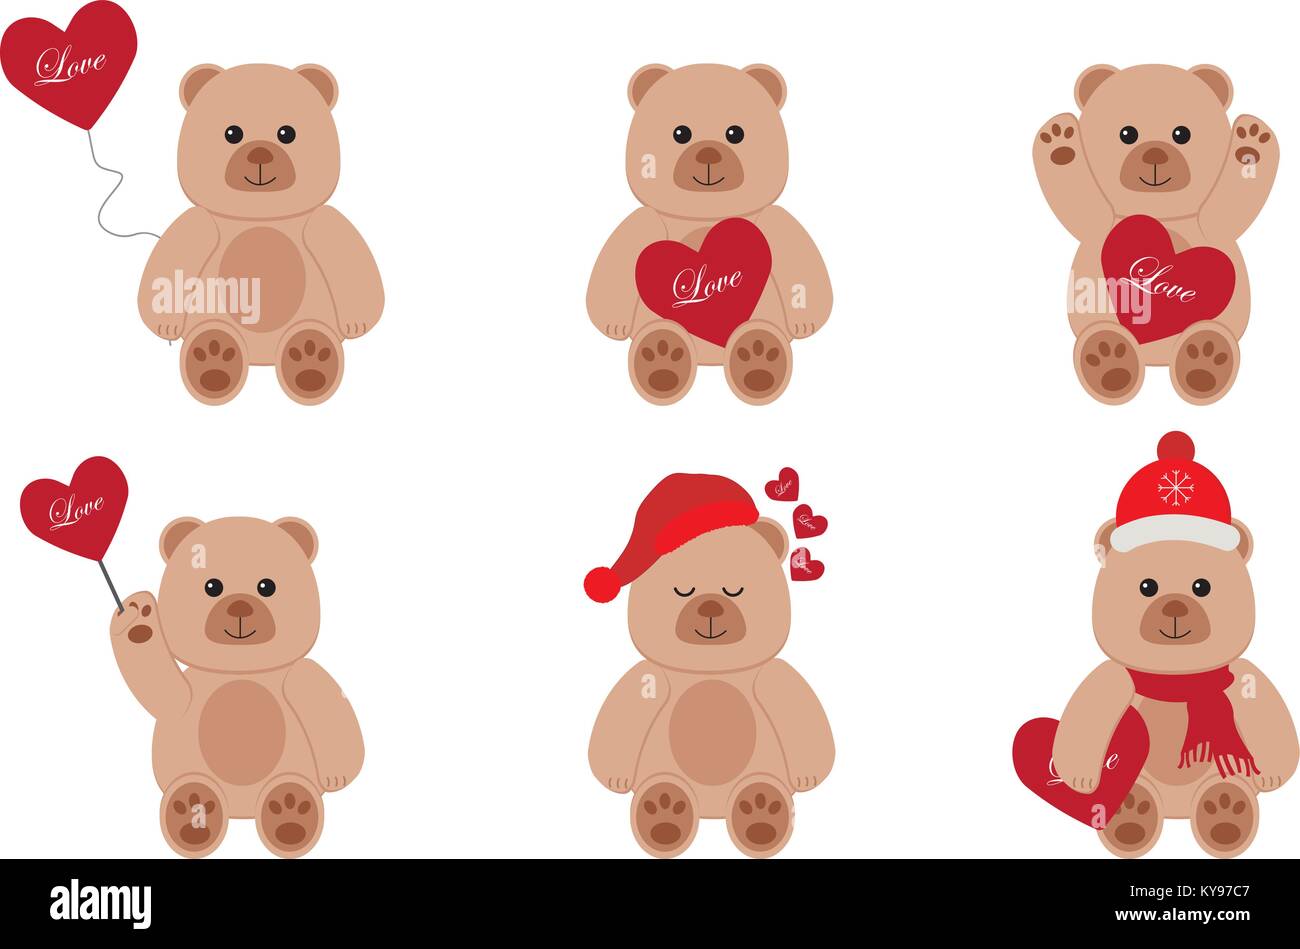 Set of teddy bears with red hearts Stock Vector